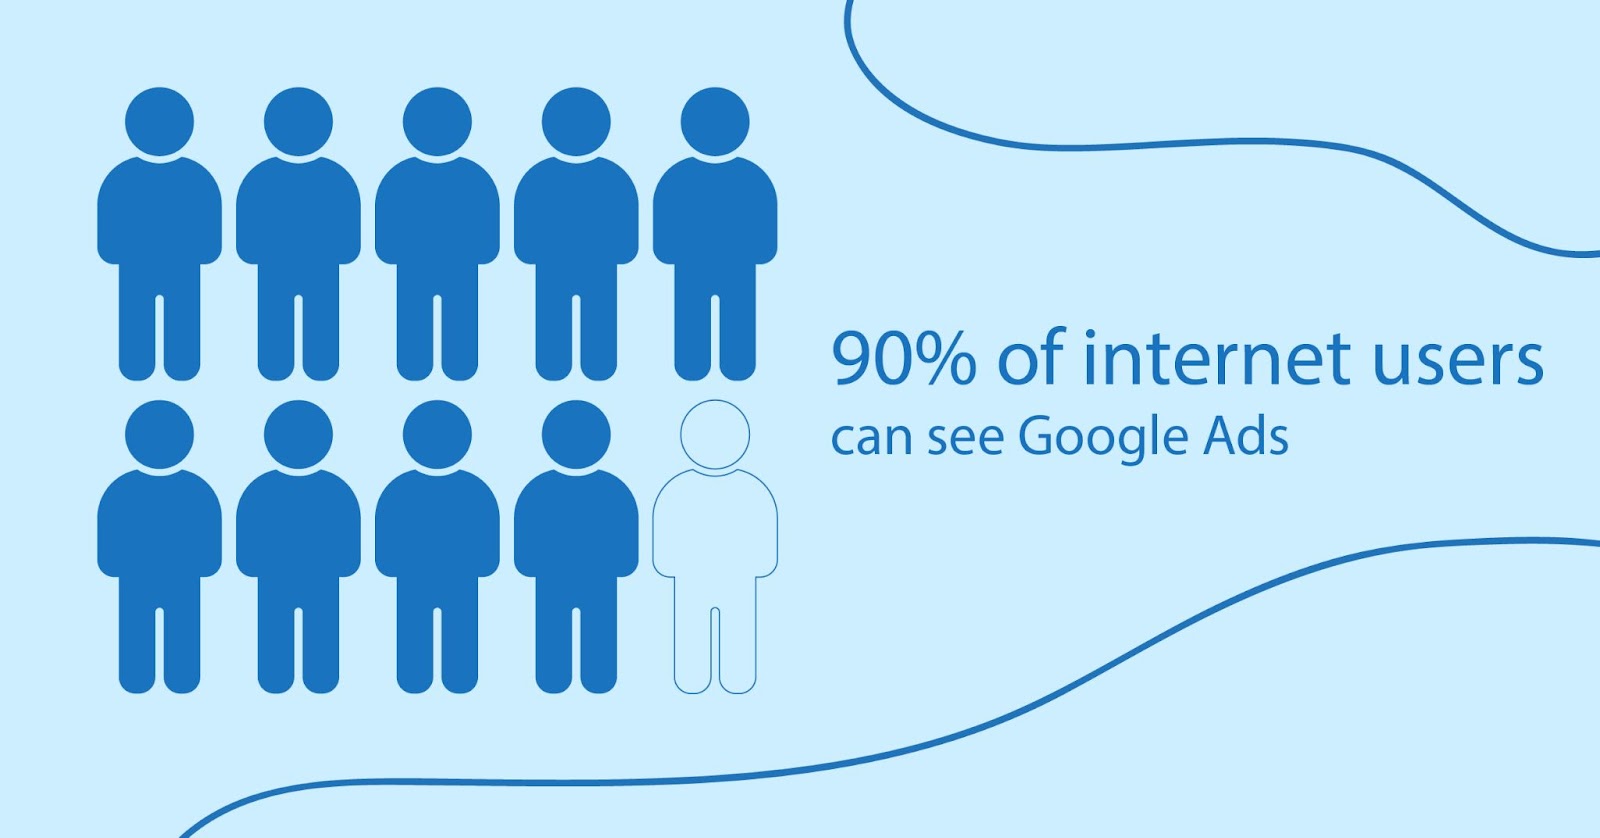 90% of internet users can see Google Ads